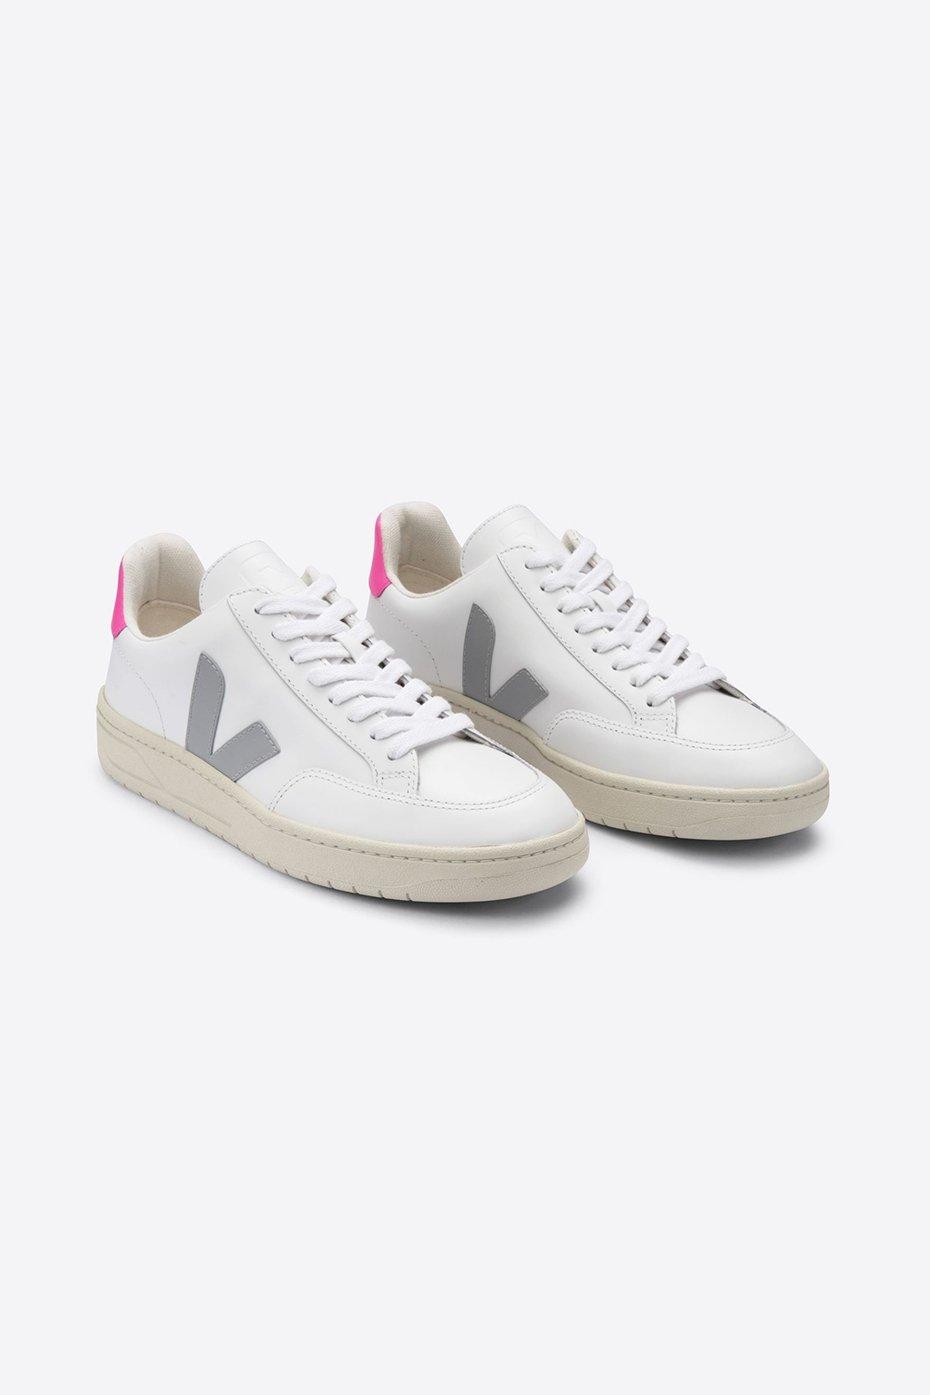 Veja V 12 White Oxford Grey Pink Leather Trainer Womens | Lyst